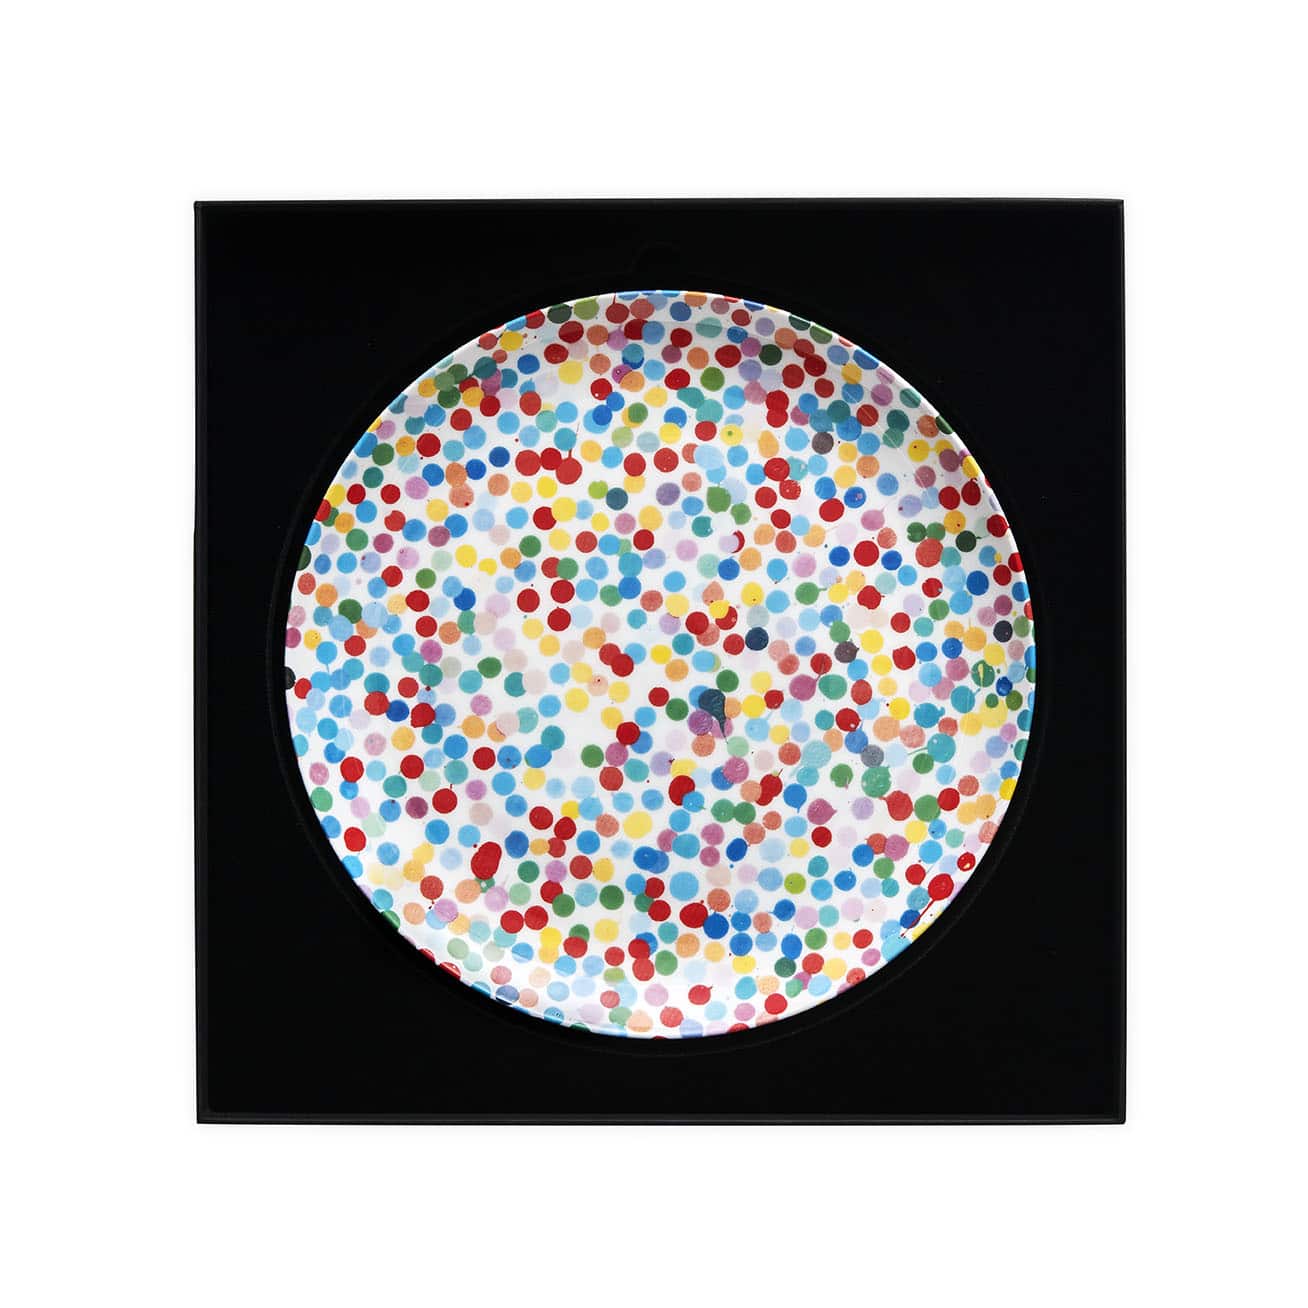 Damien Hirst - All Over Dot Large Screen Printed Plate, Currency Dots Design